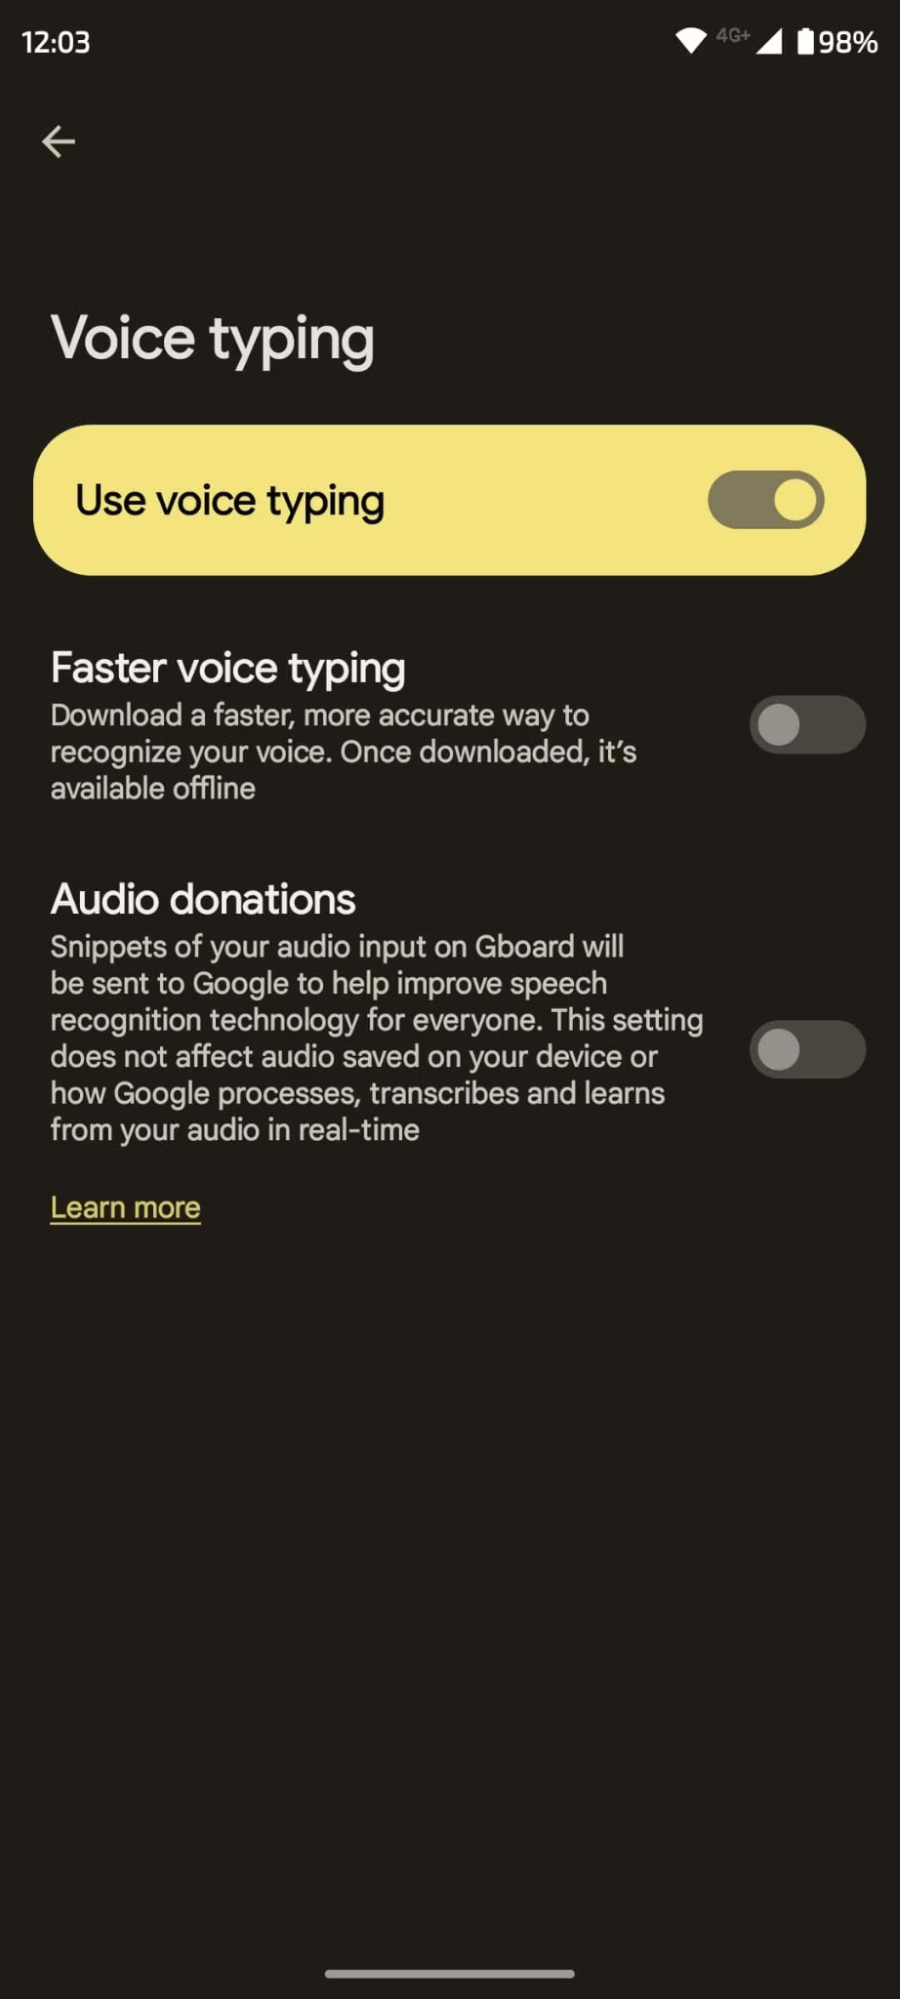 gboard voice typing toggled on